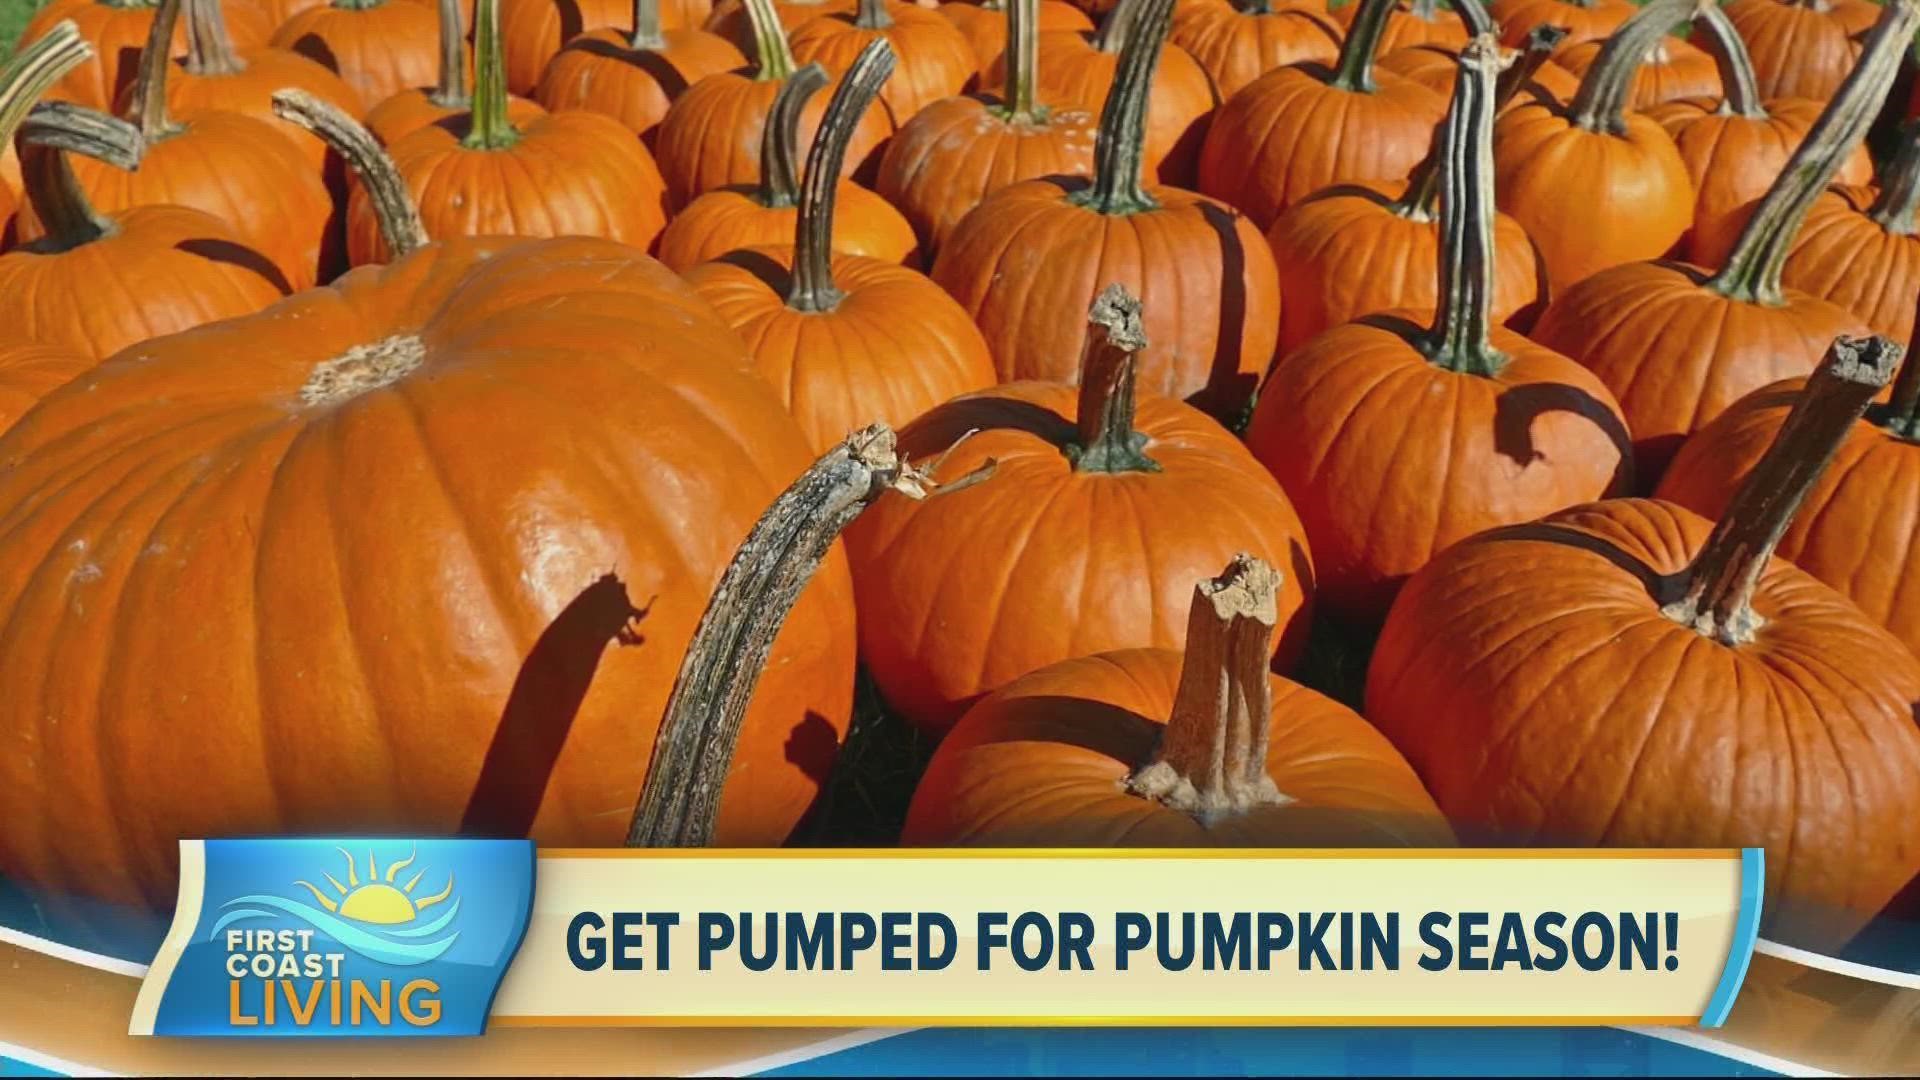 Find out about the different types of pumpkins you can grow in Florida and how to make them last longer so they shine bright until Halloween.